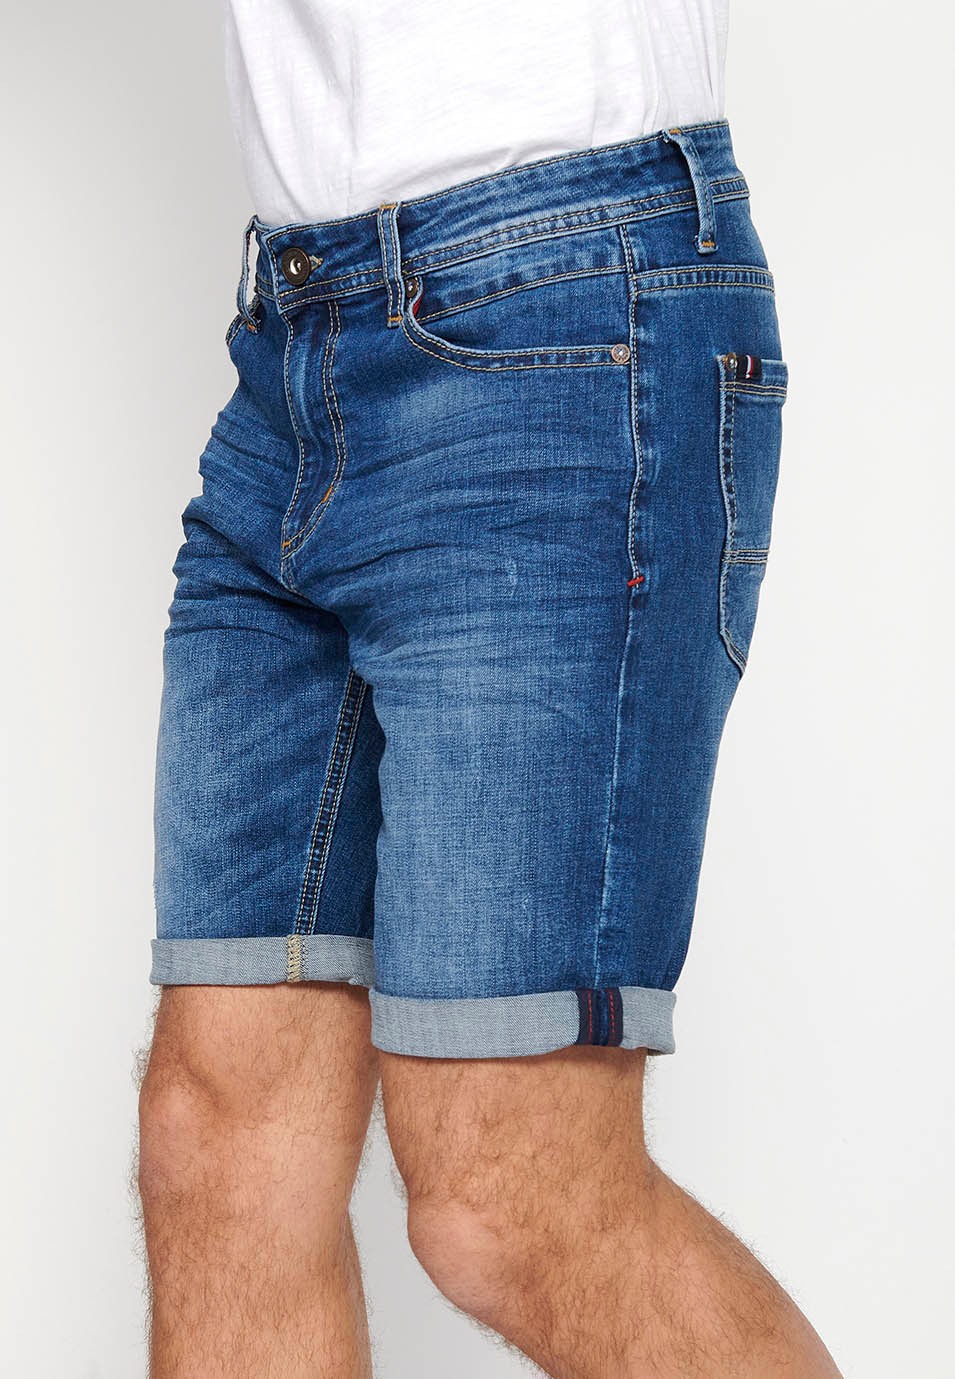 Bermuda denim shorts with front zipper and button closure with five pockets, one blue pocket pocket for Men